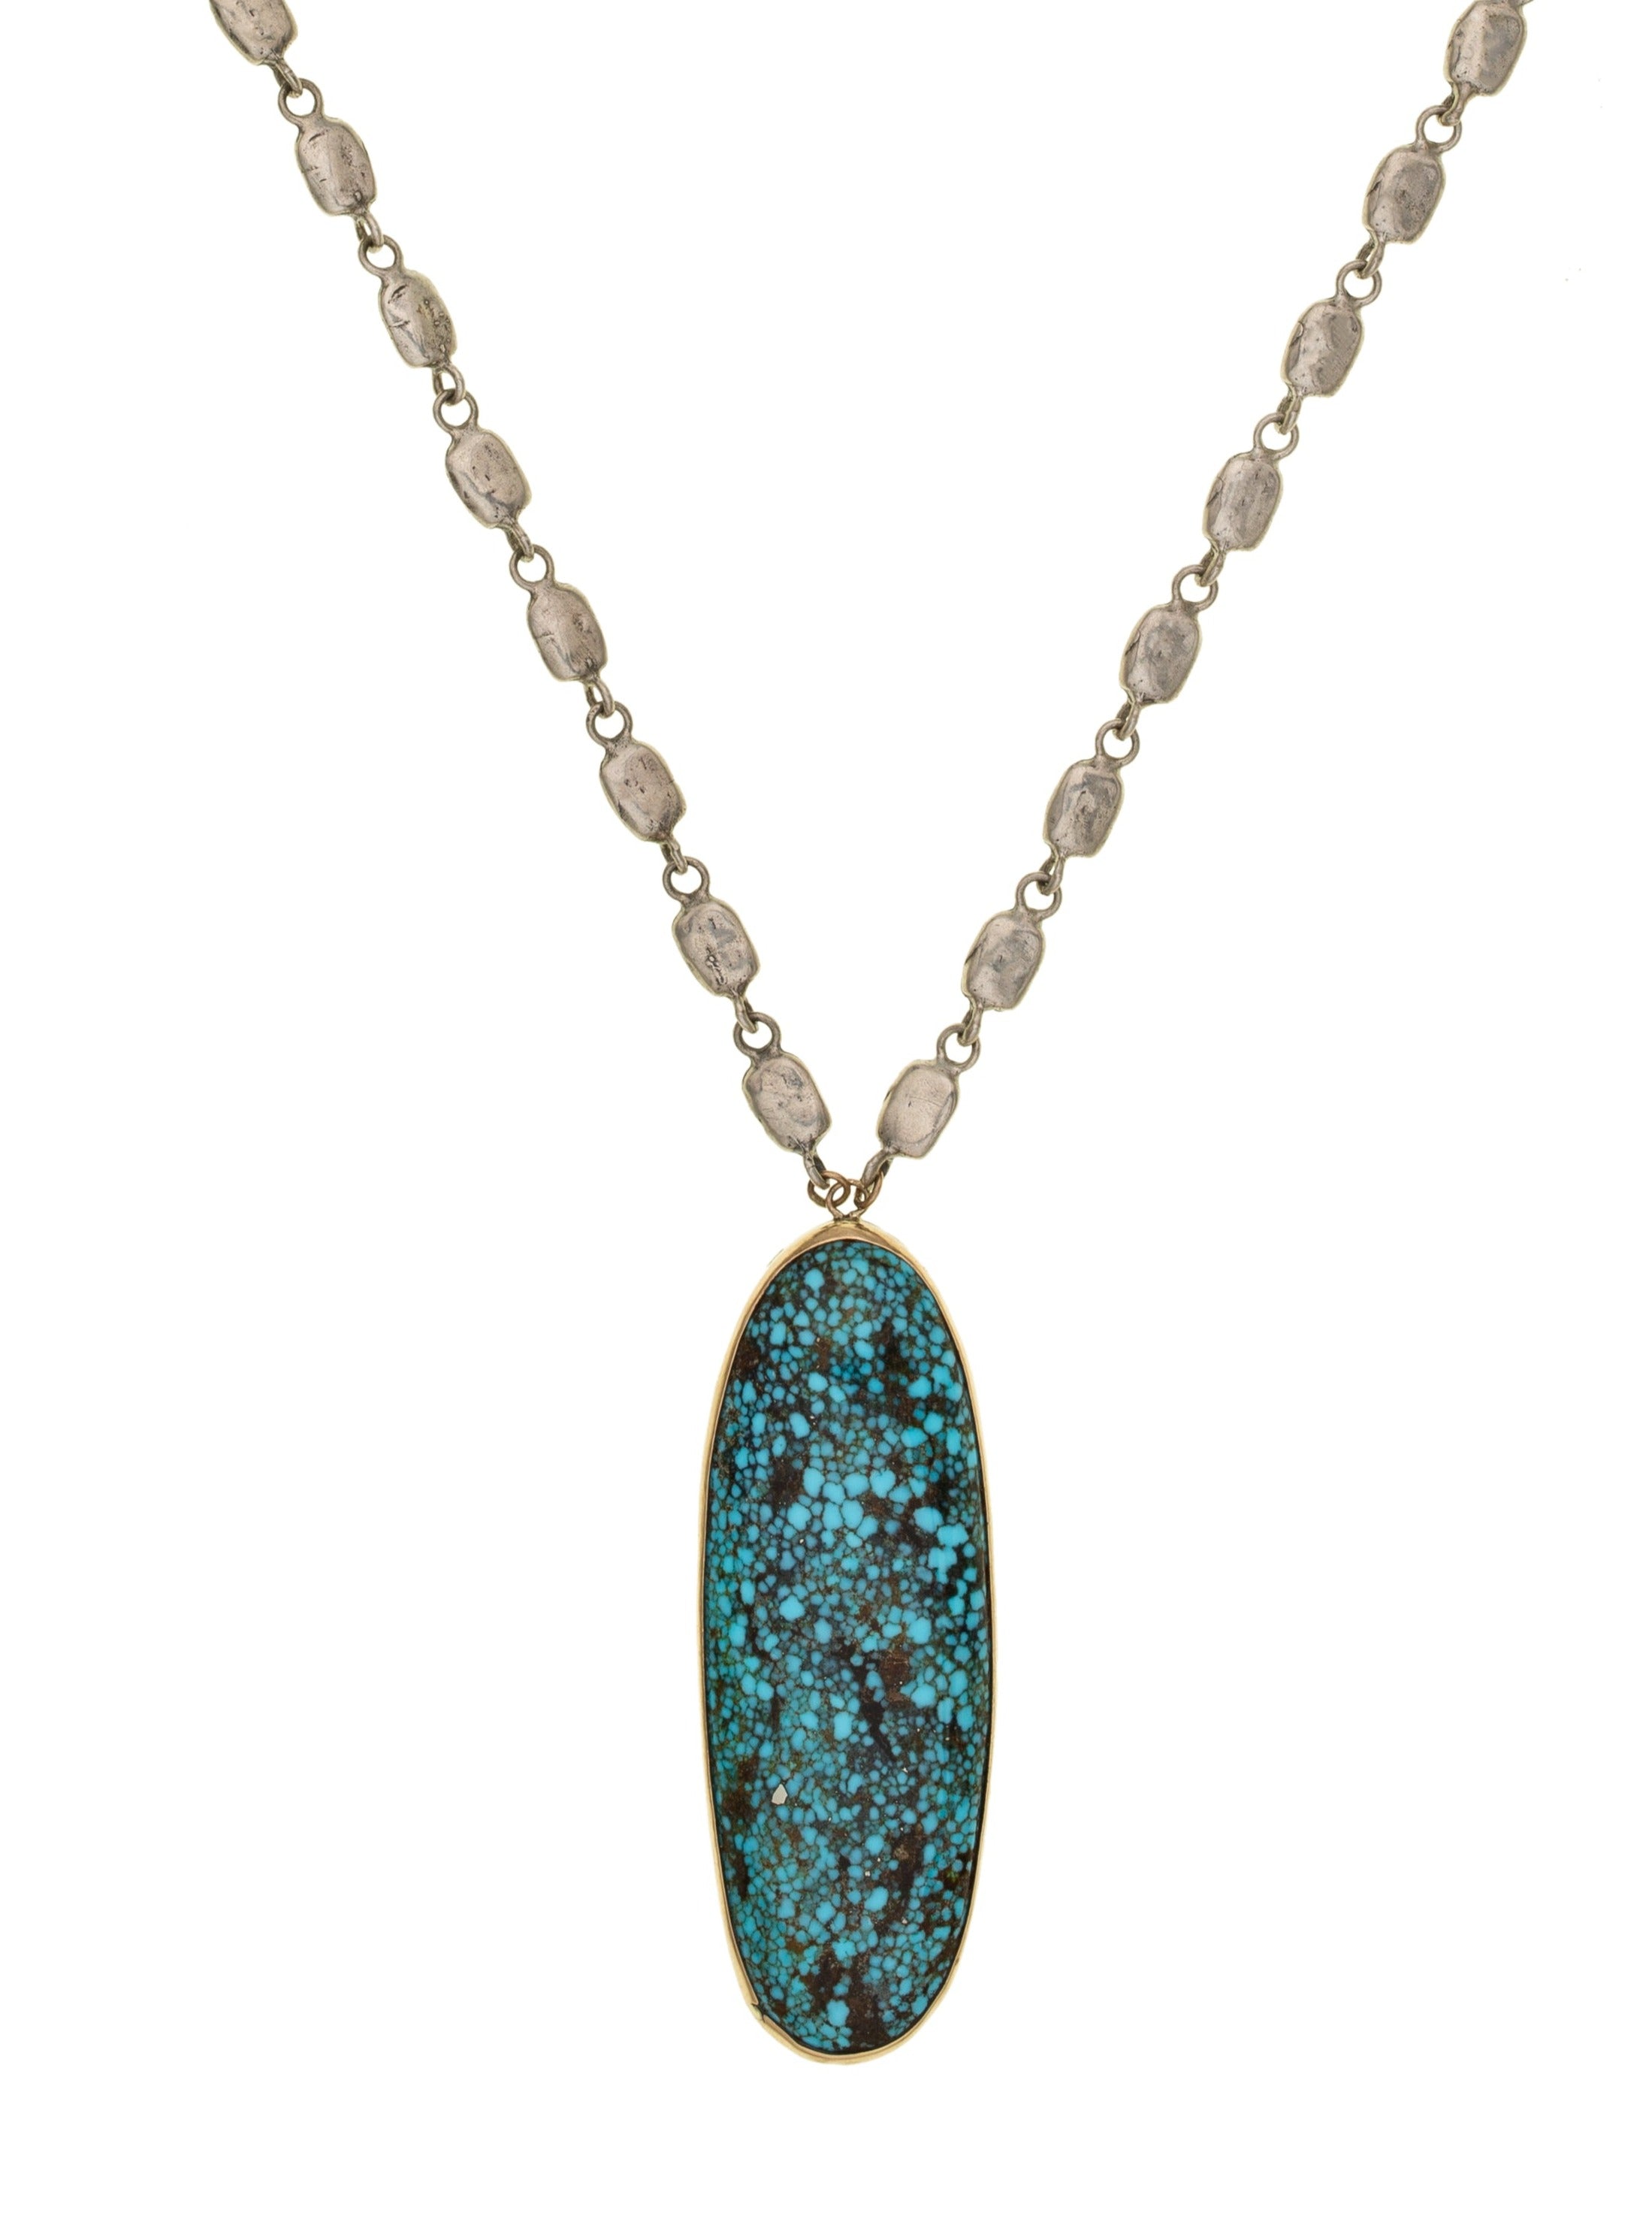 Pebbles Of Turquoise Necklace